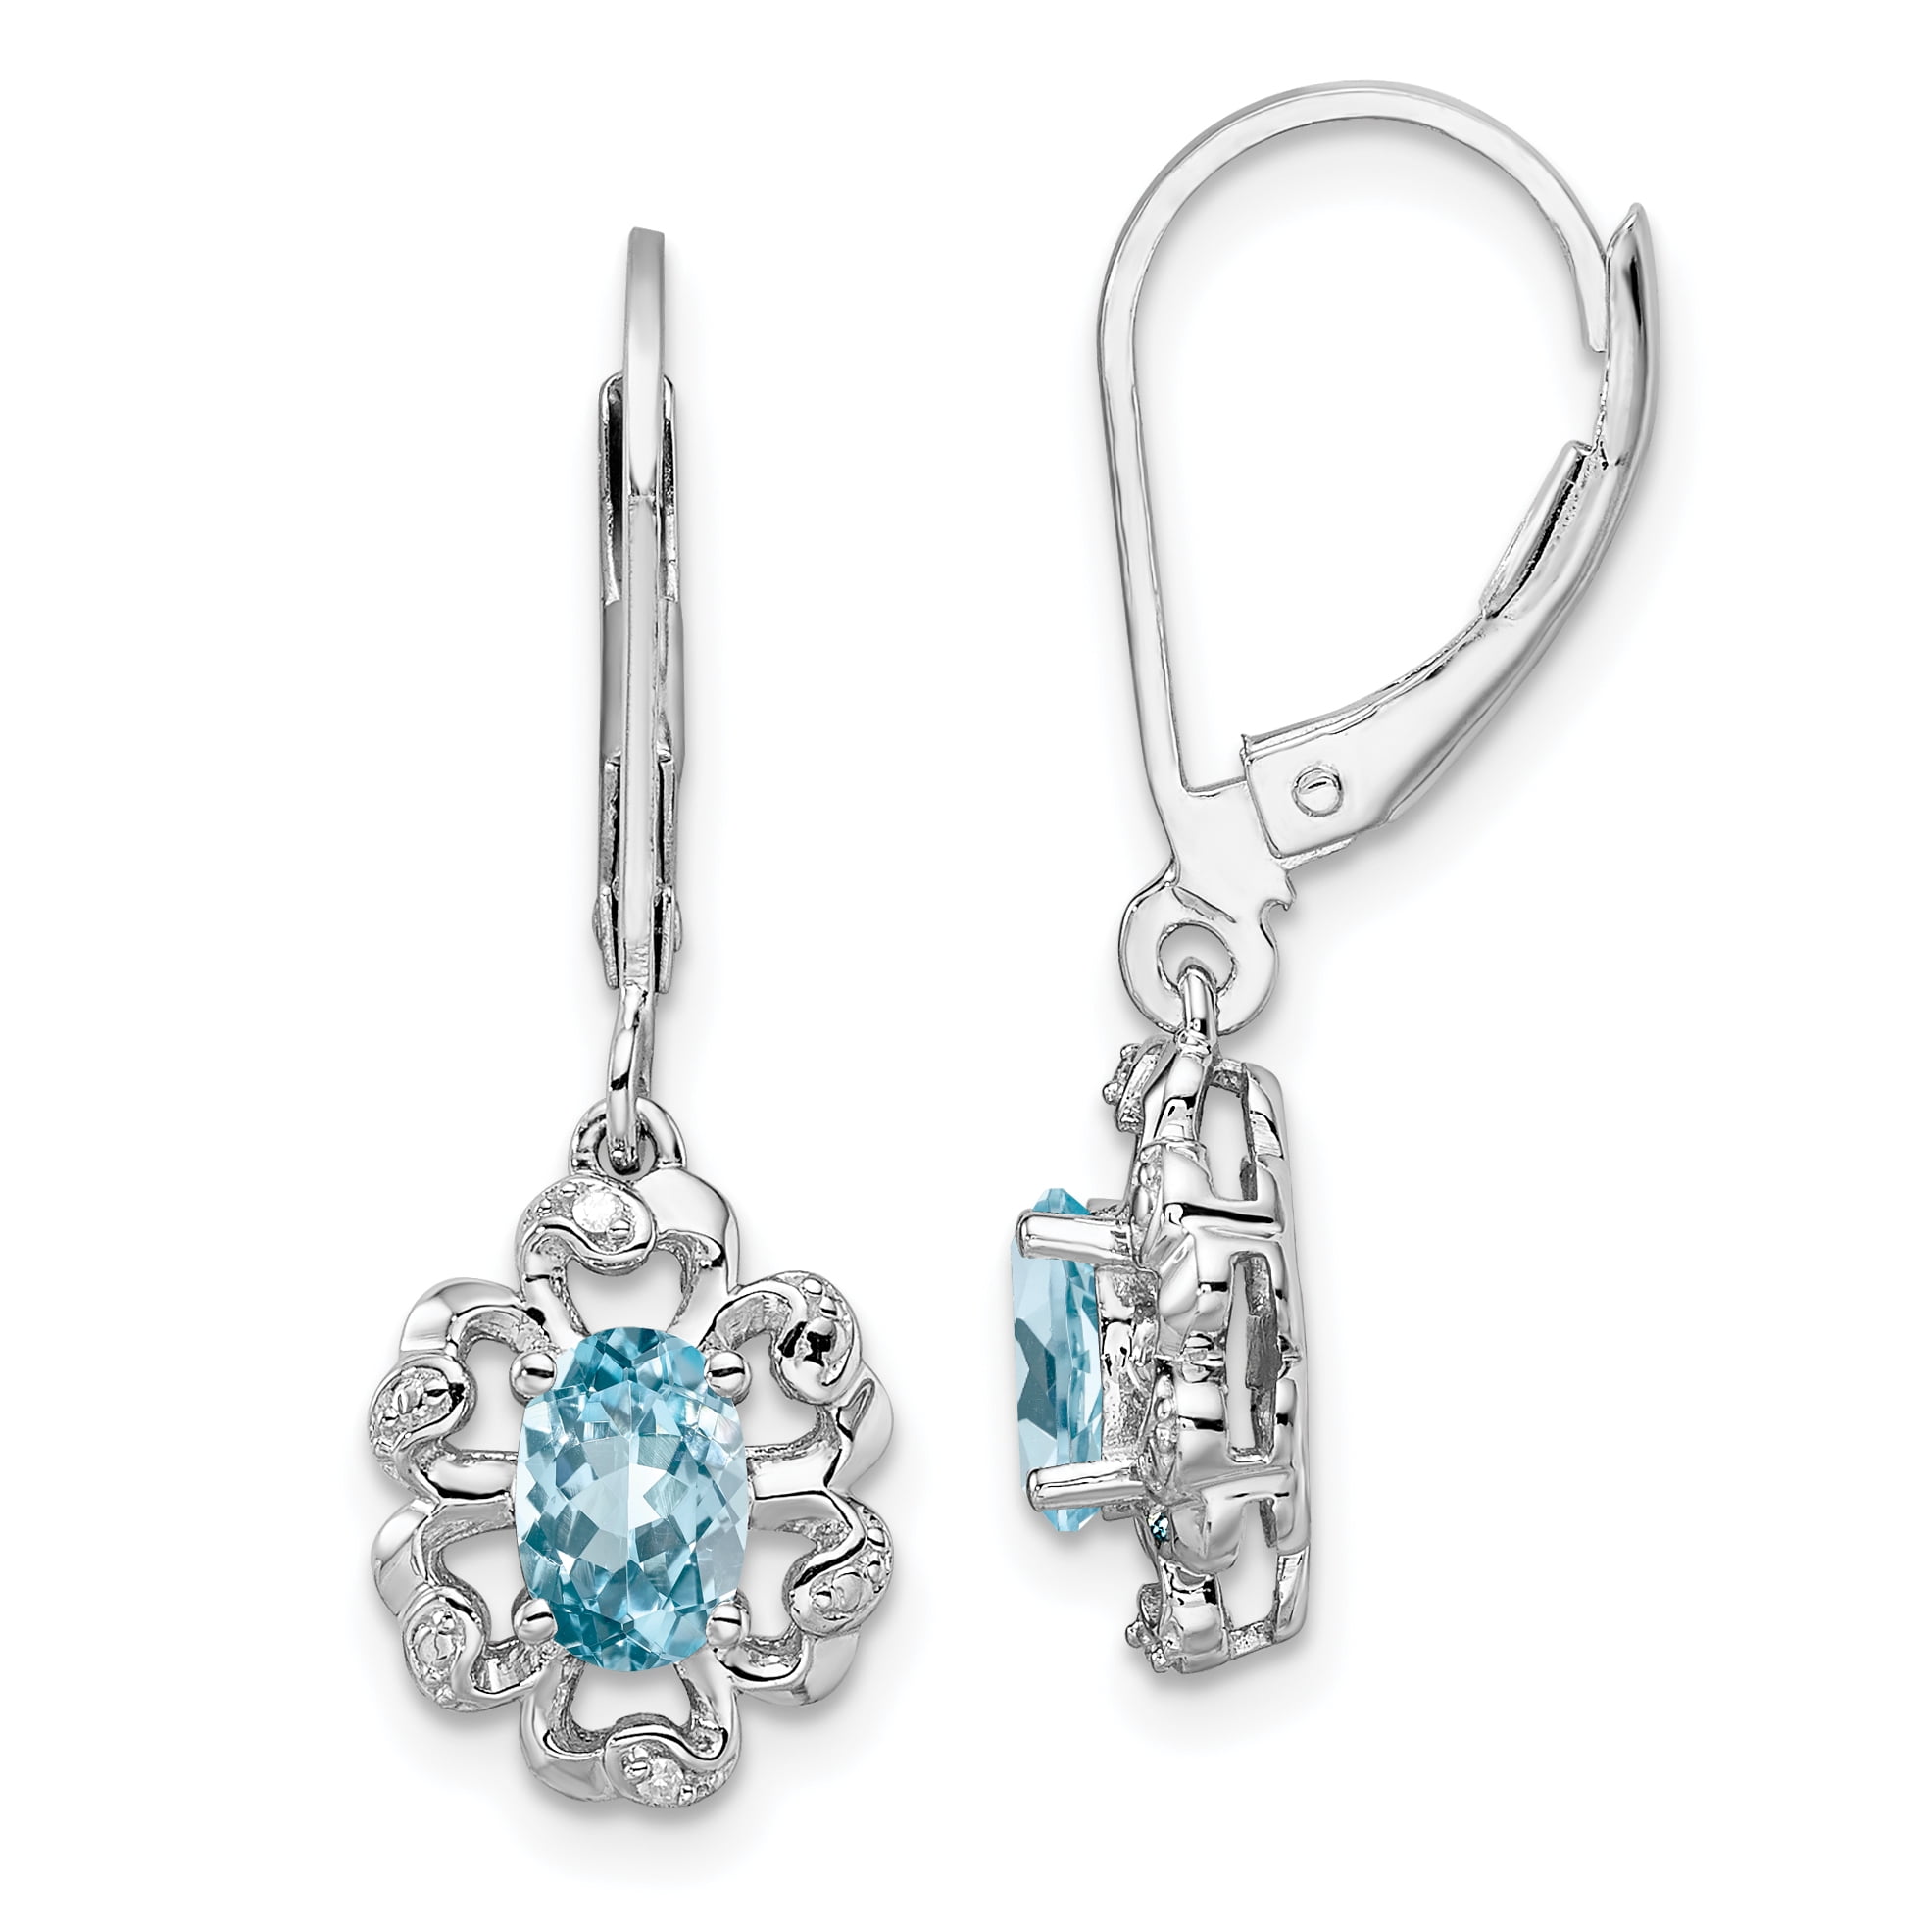 Solid .925 Sterling Silver Rhodium-plated Diamond & Light Blue Topaz Earrings 28x9mm